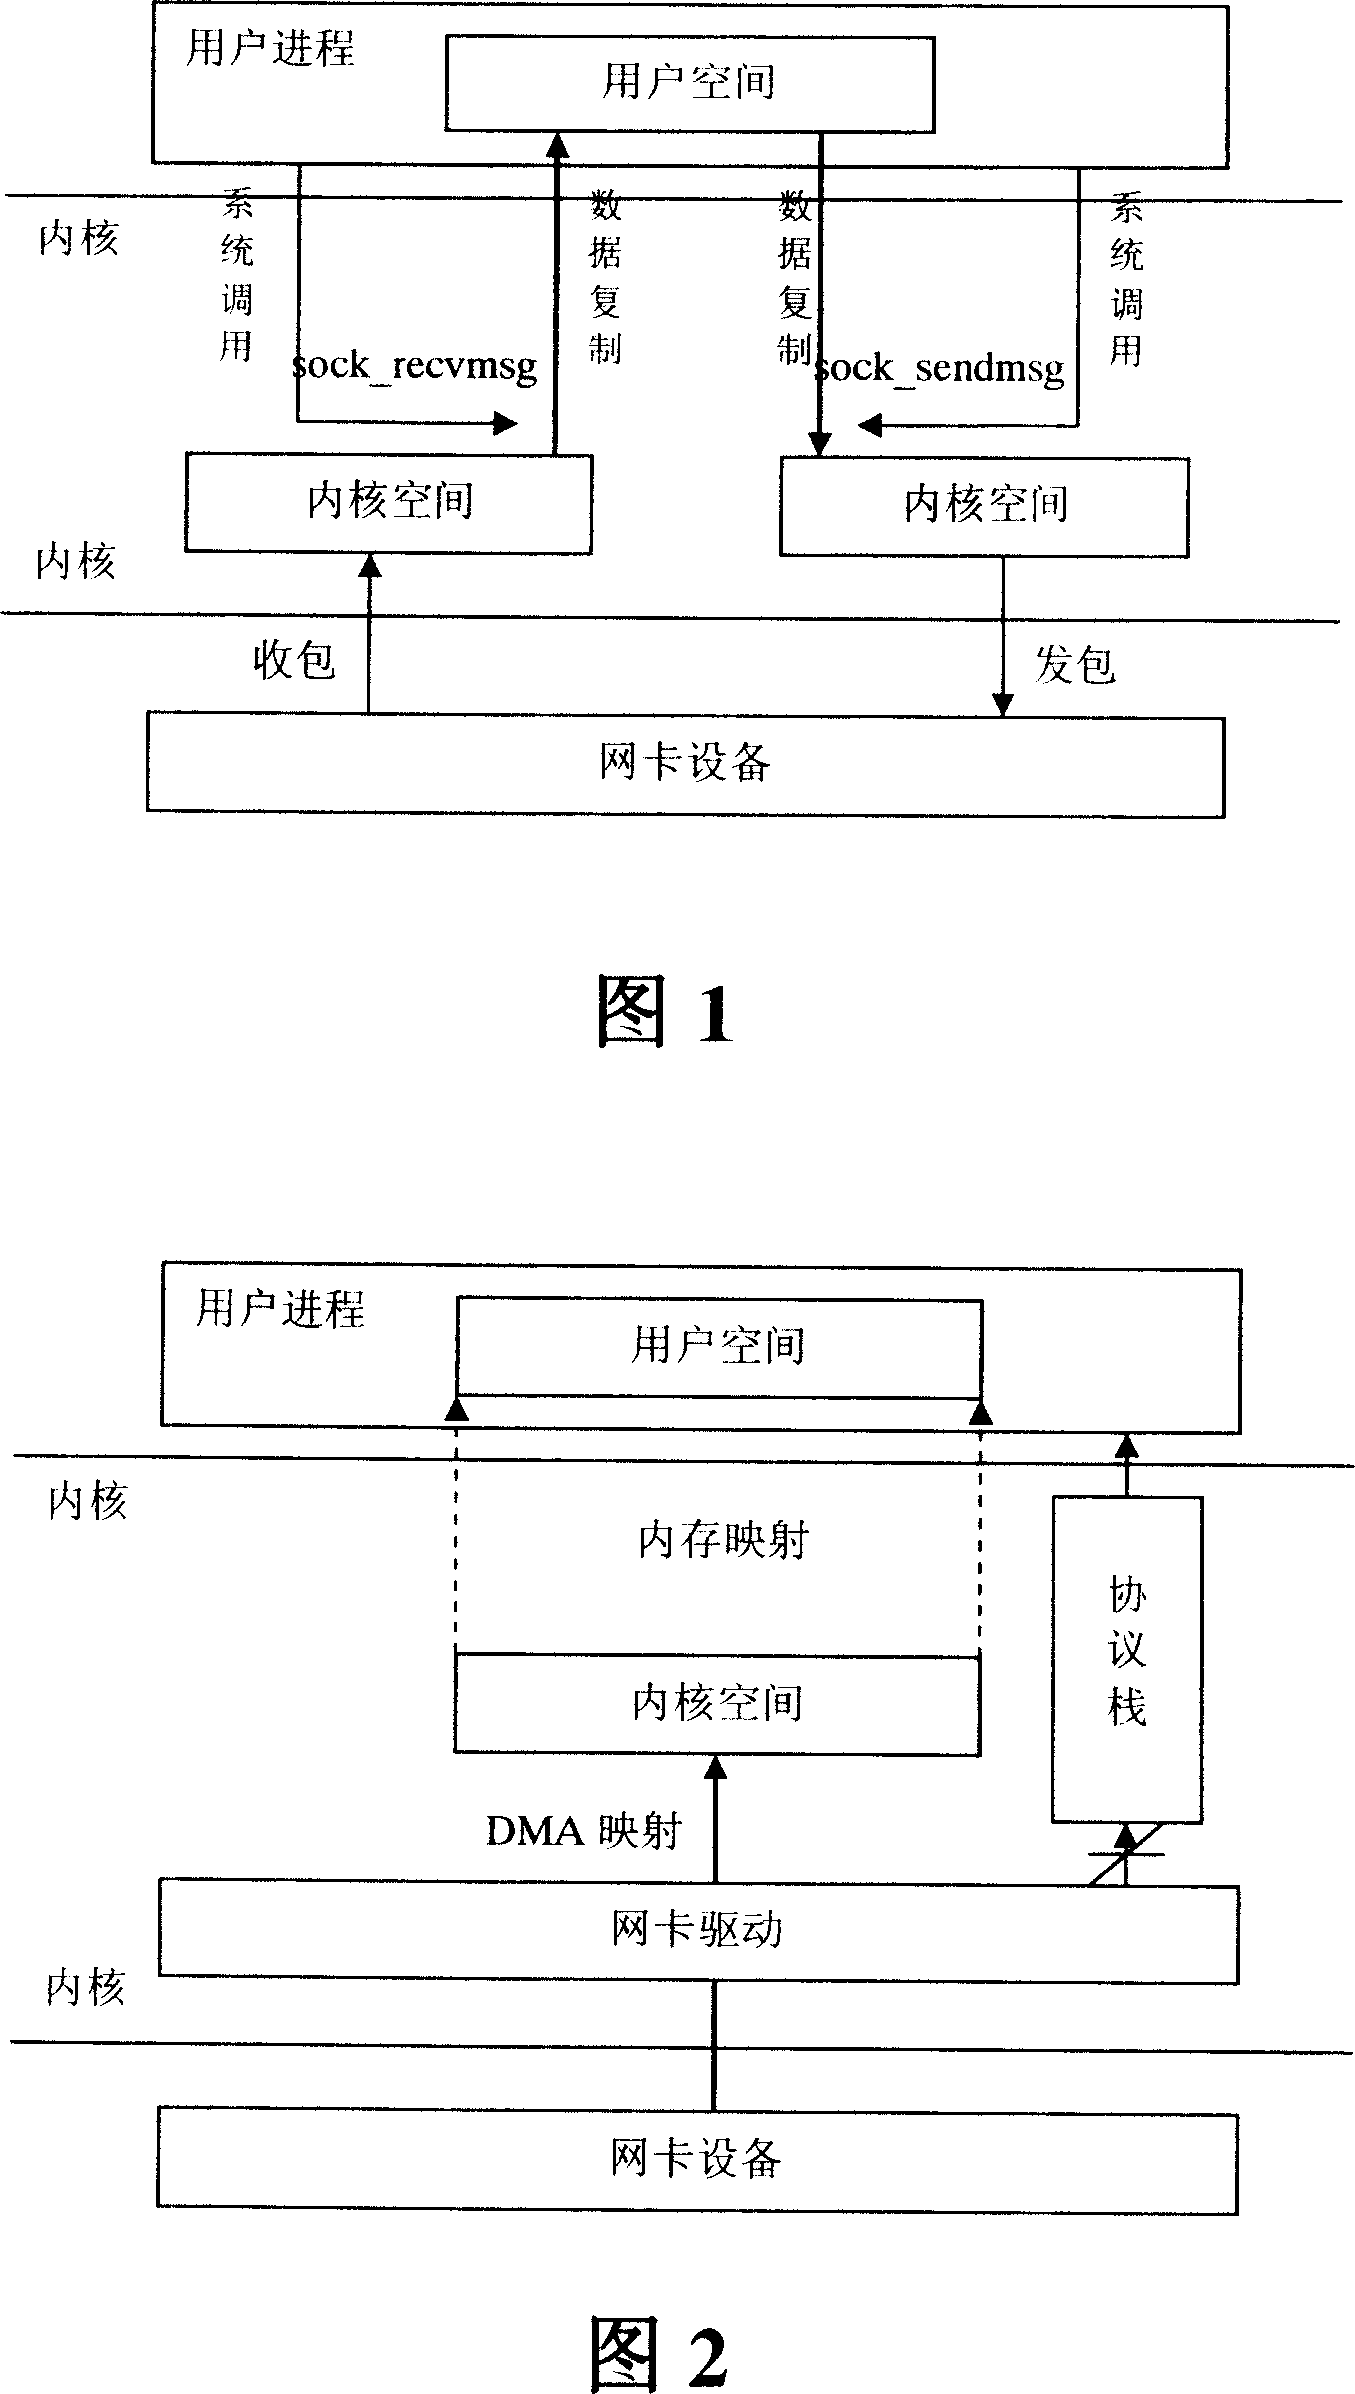 Apparatus and method for realizing zero copy based on Linux operating system